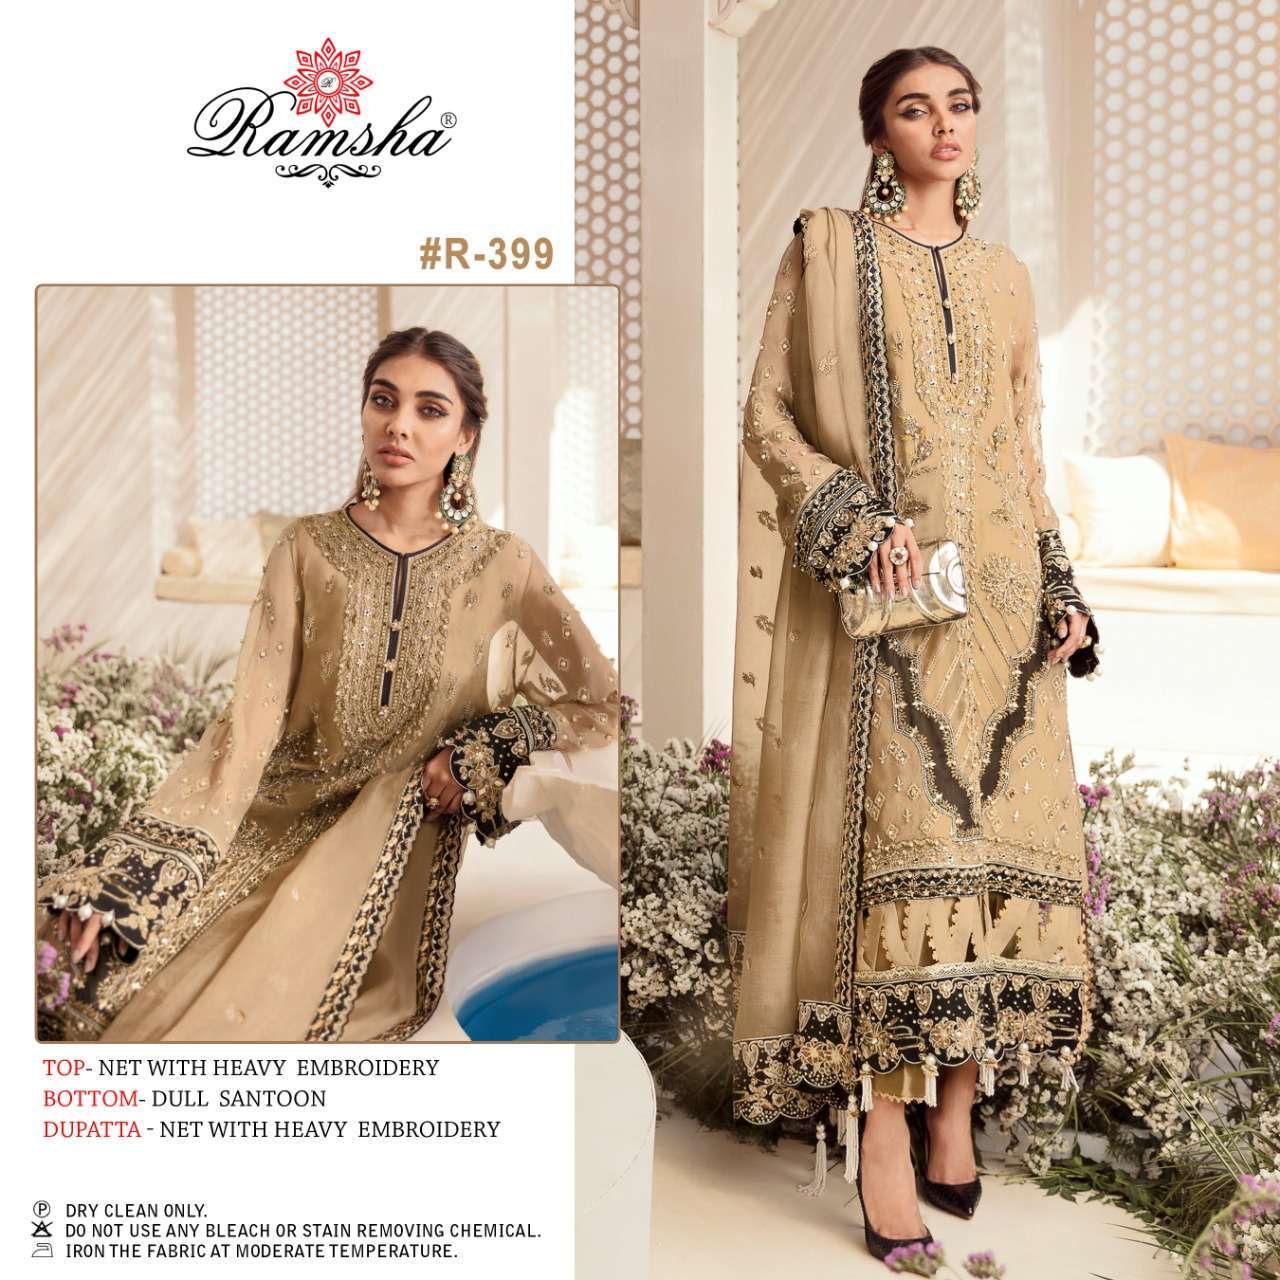 RAMSHA PRESENTS VOL 31 BUTTERFLY NET EMBROIDERY WHOLESALE PAKISTANI SUITS